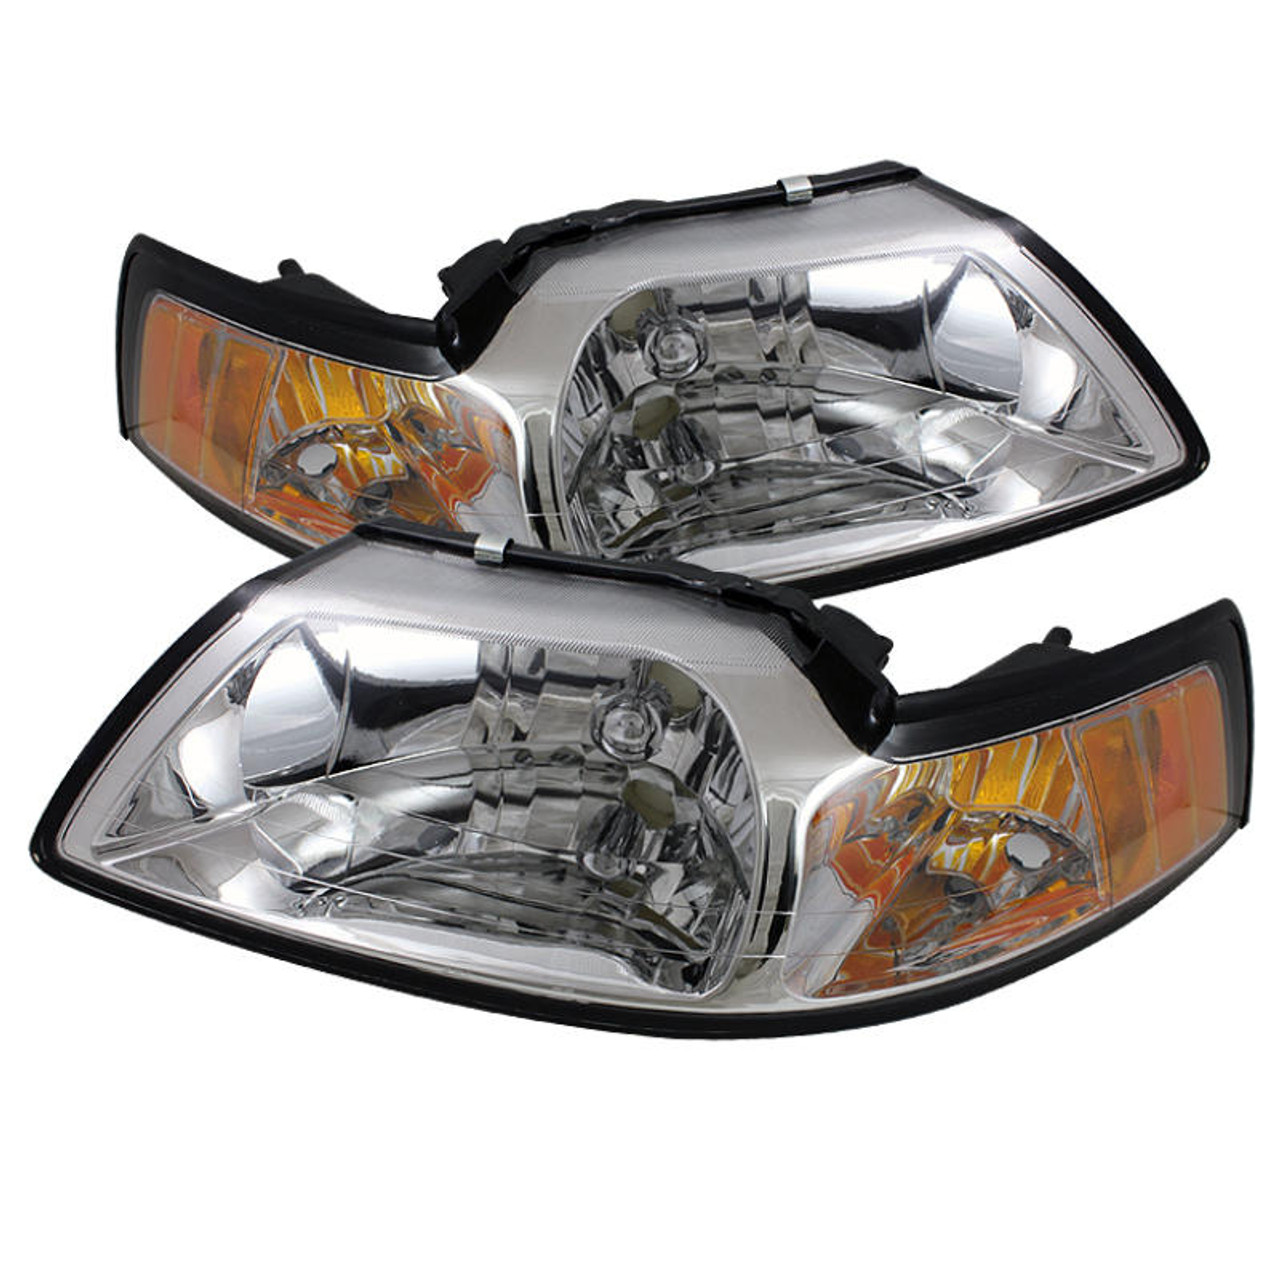 SPYDER Xtune Ford MUStang 99-04 Amber Crystal Headlights Chrome HD-JH-FM99-AM-C - 5064493